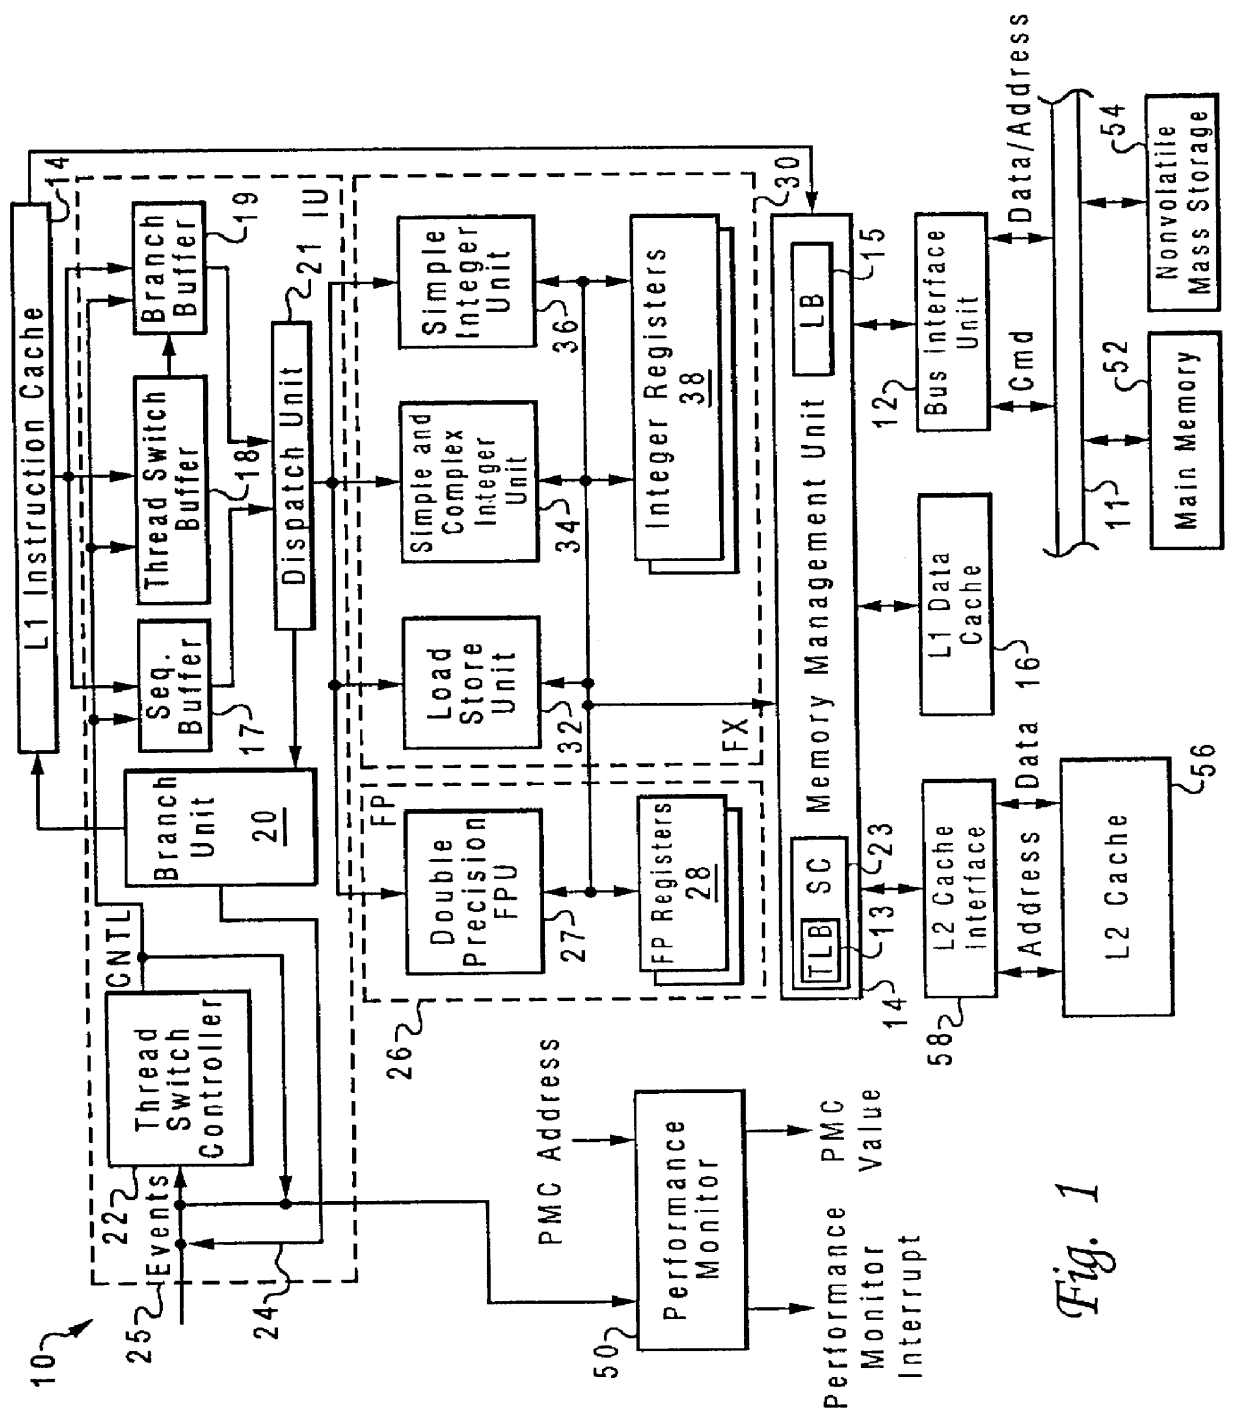 Performance monitoring of thread switch events in a multithreaded processor